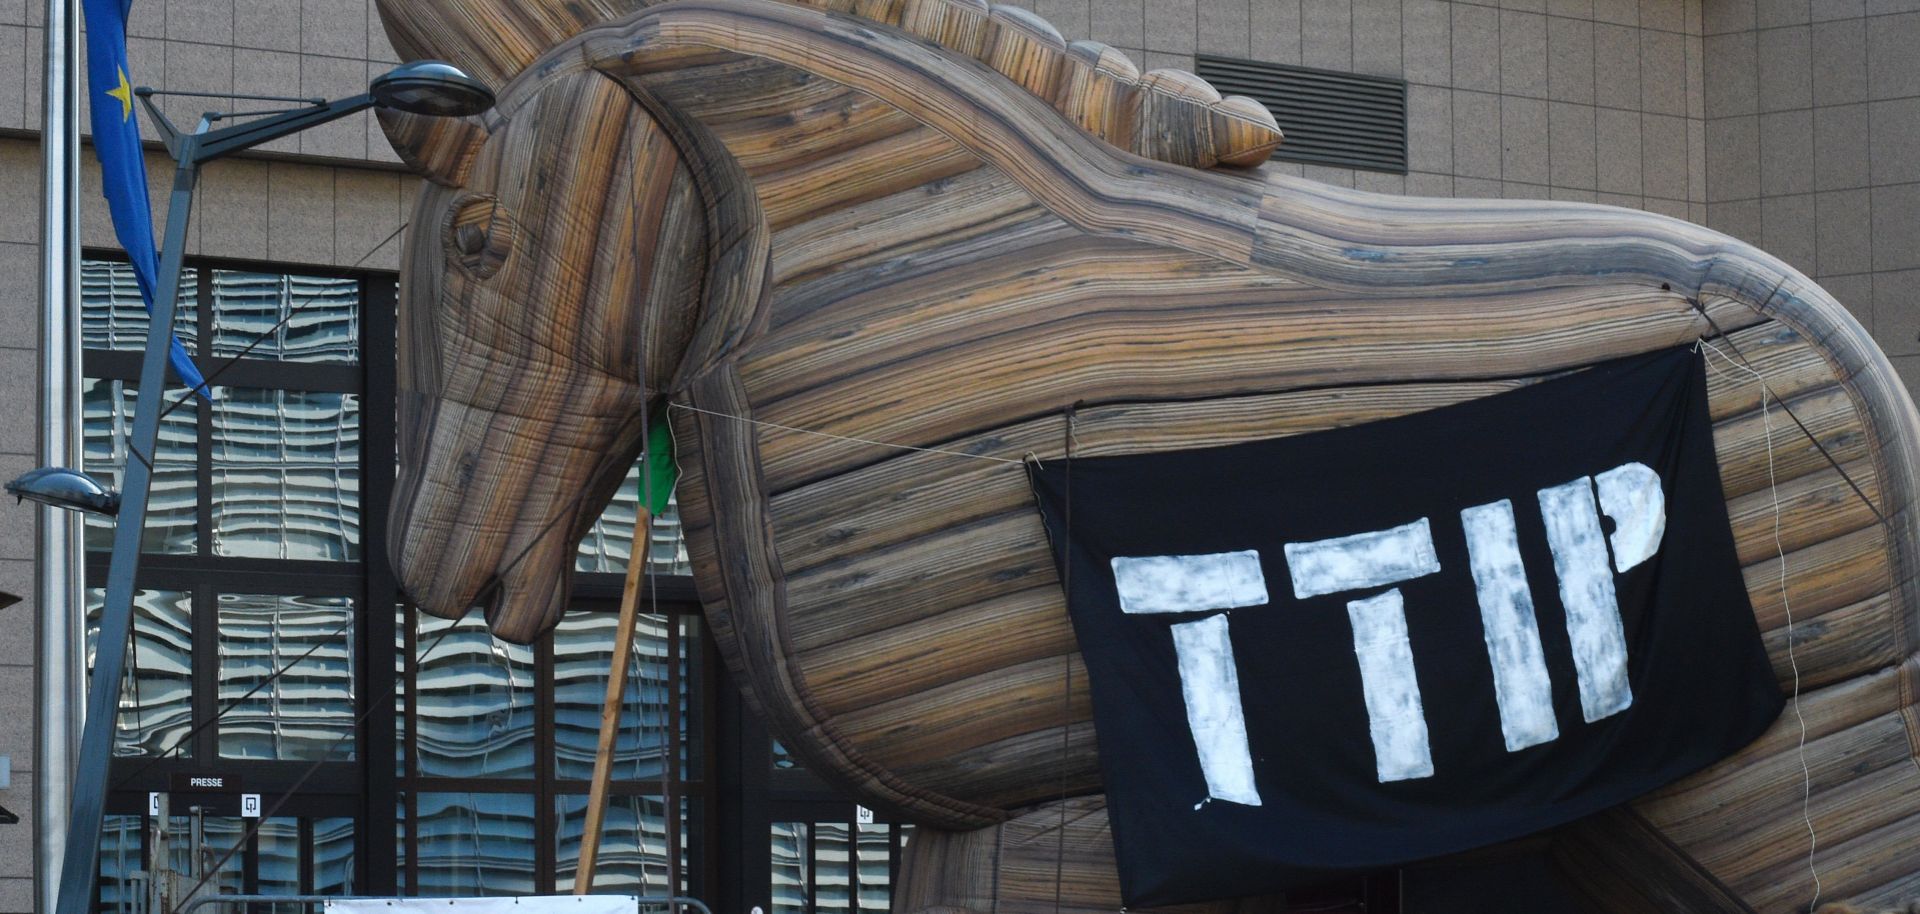 Protesters use an inflatable Trojan horse outside European Union headquarters on Sept. 20, 2016, to express their disagreement with the planned Transatlantic Trade and Investment Partnership.